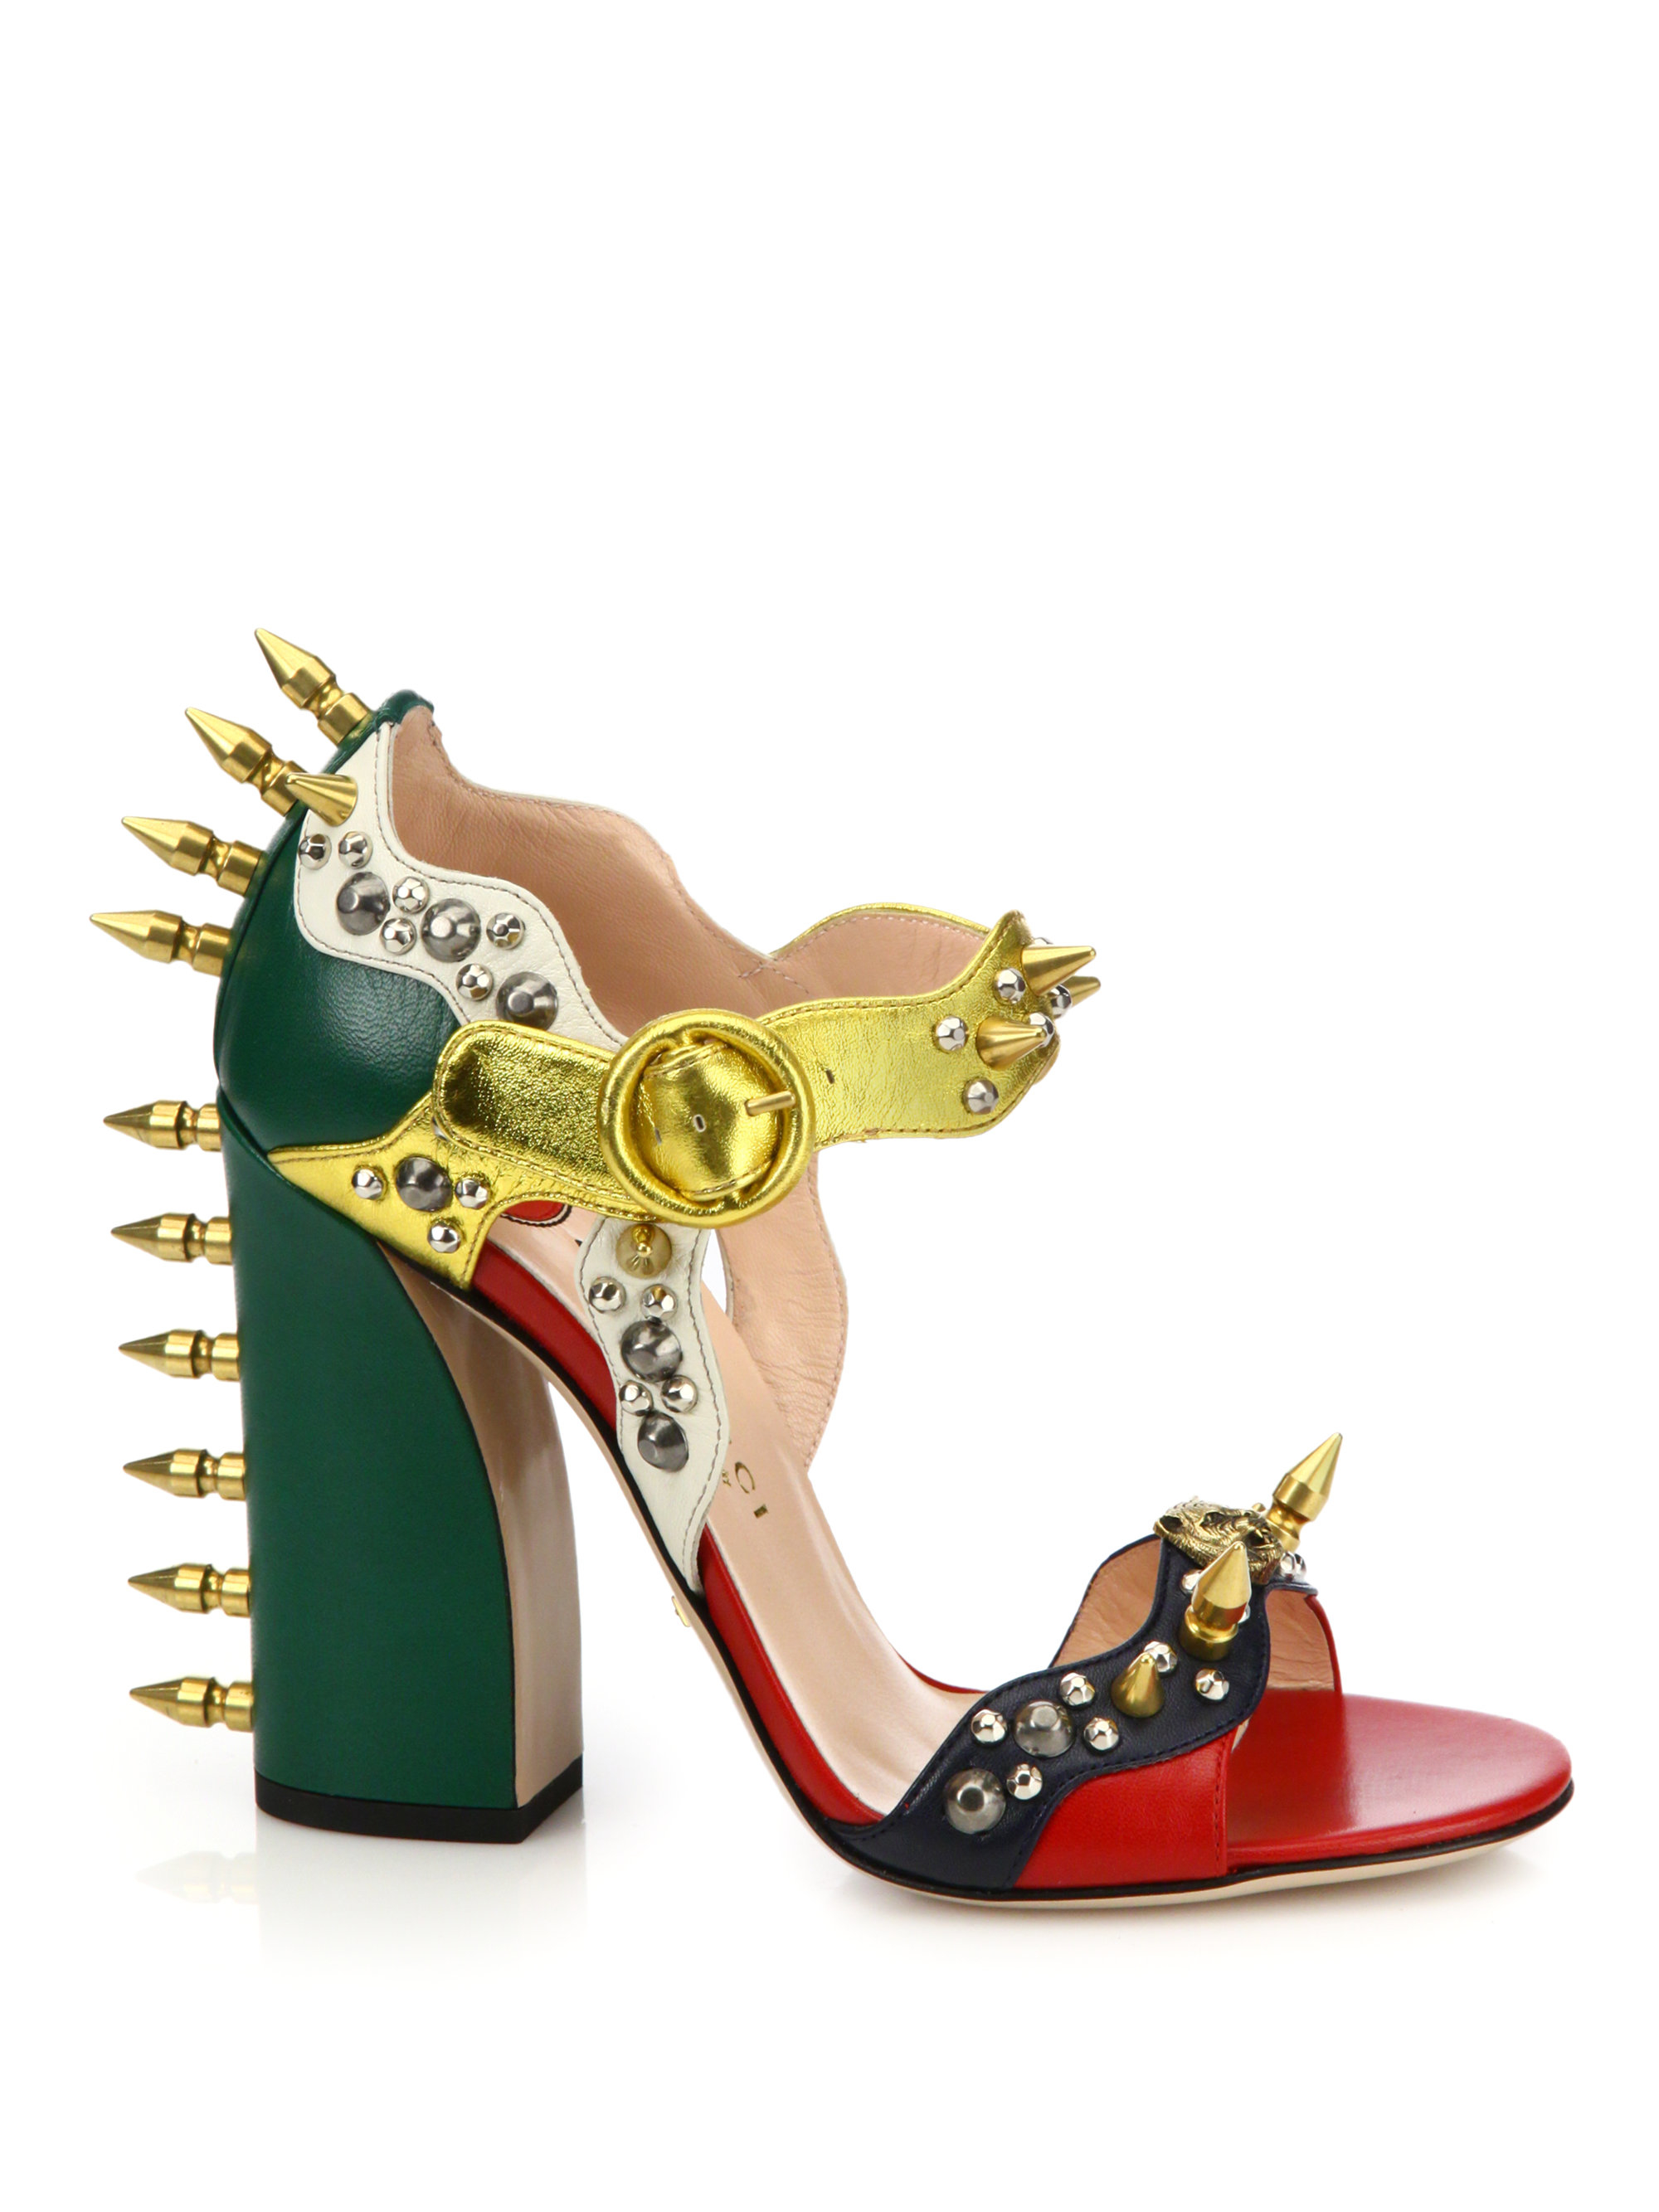 gucci spiked heels